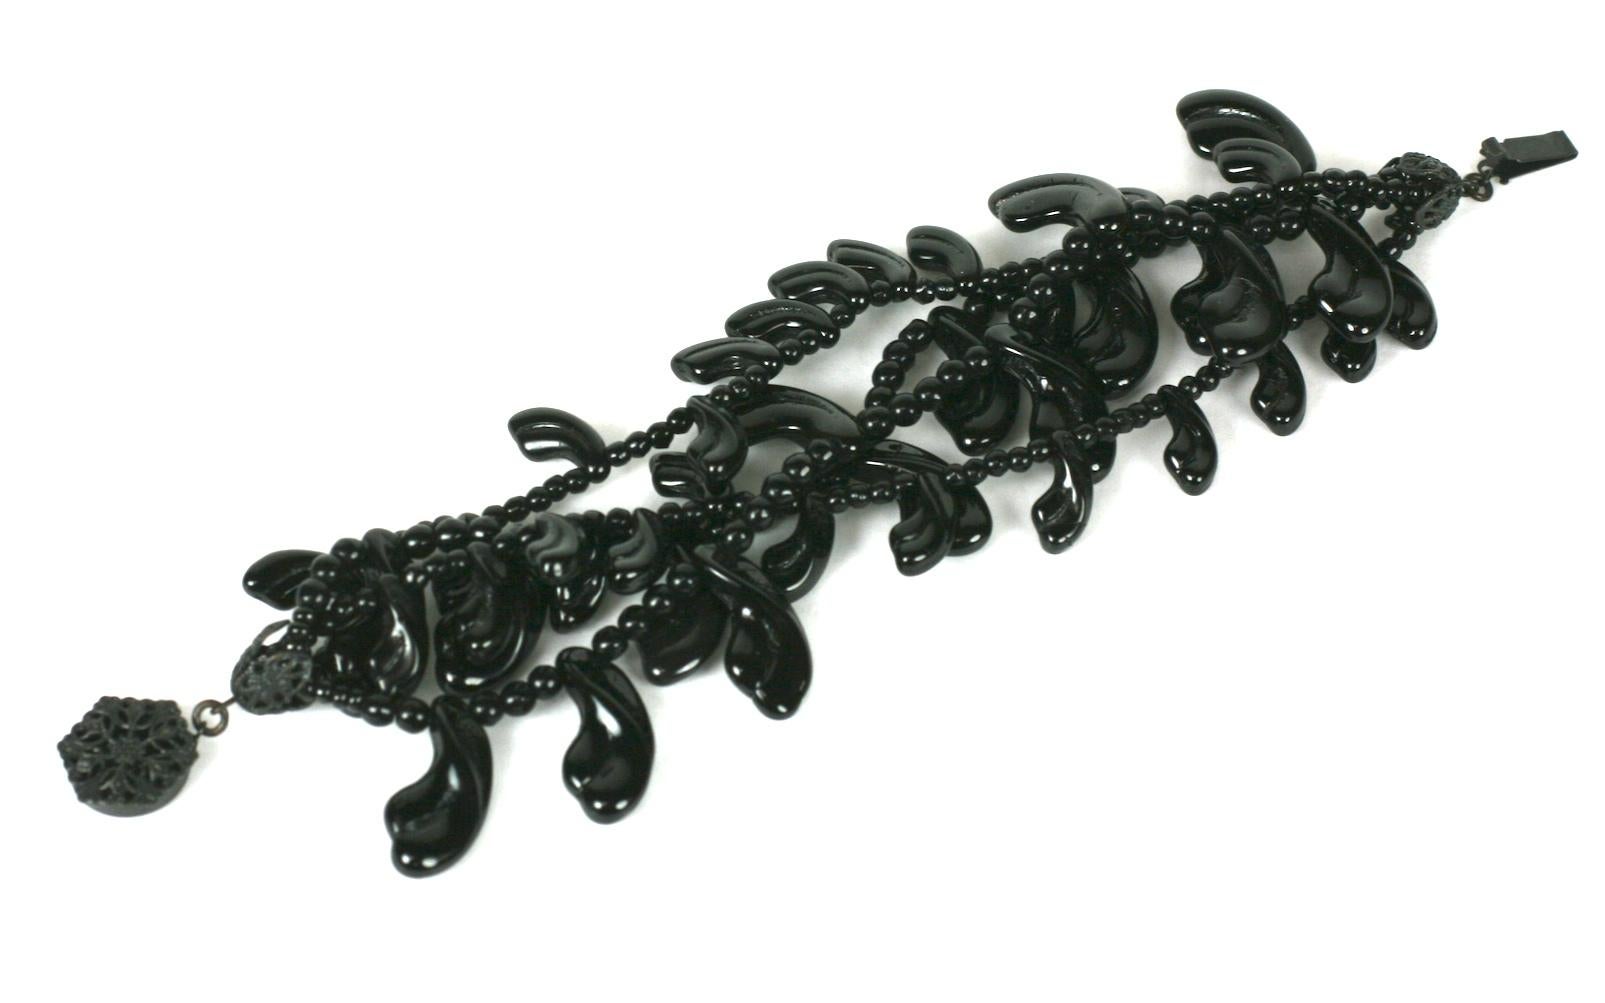 Miriam Haskell four strand jet pate de verre petal bracelet. The hand made glass petals strung with rounded jet seed bead spacers. Signature clasp and filigree caps of black japanned metal, Signed: Miriam Haskell.
Excellent Condition. 
Length